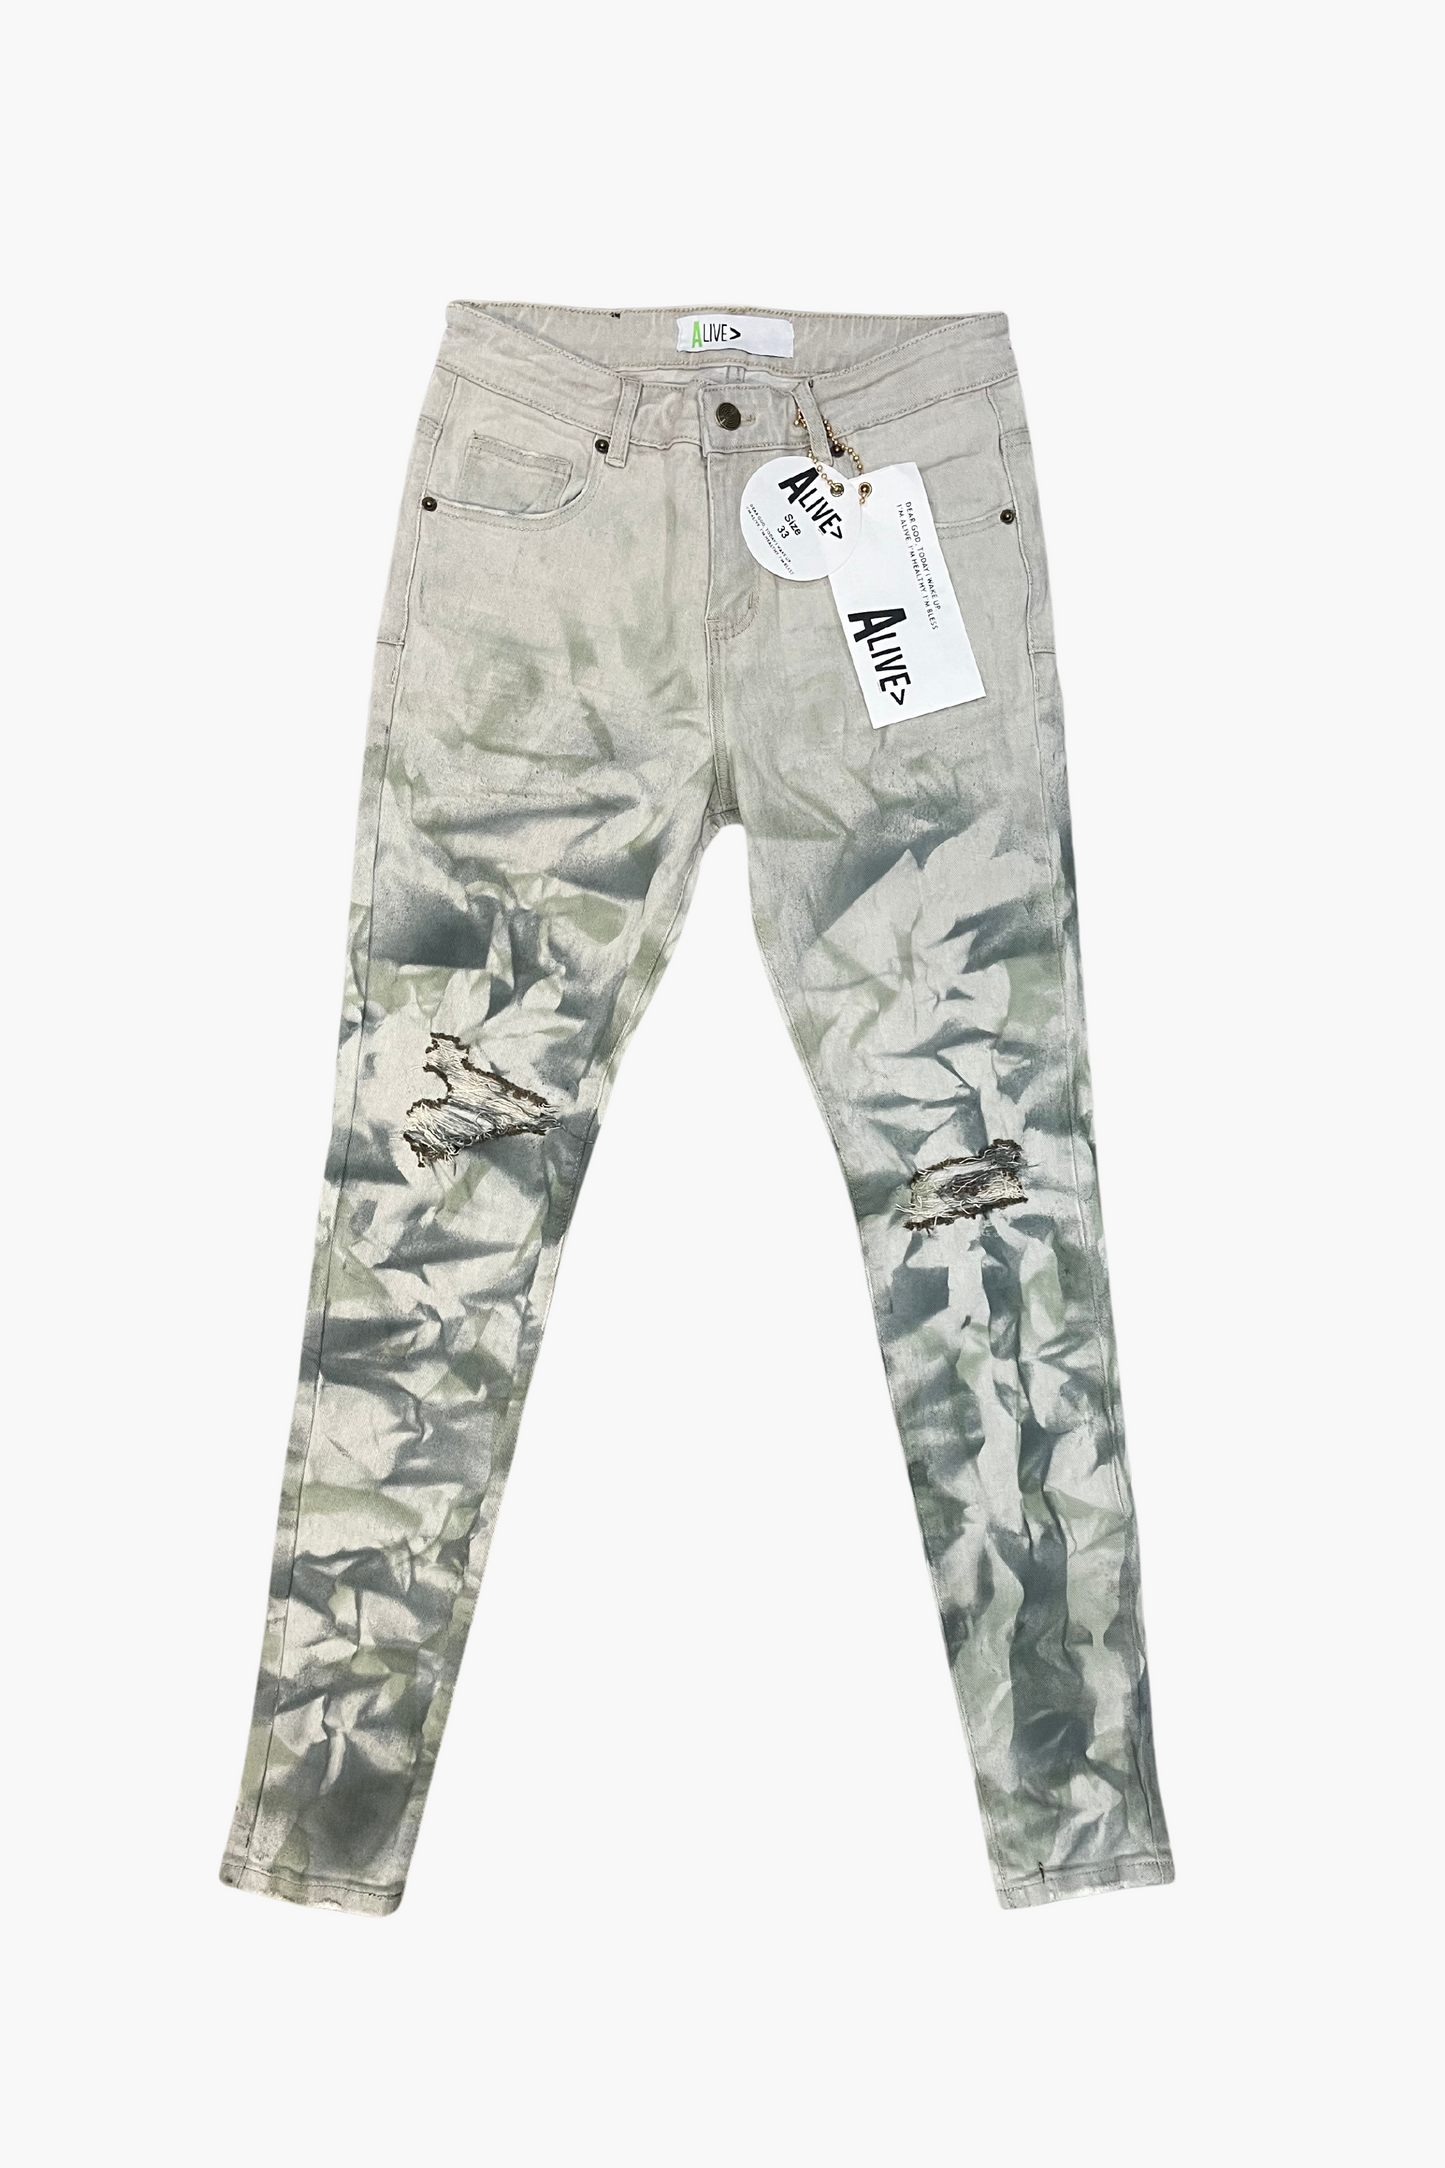 Alive Jeans white with green